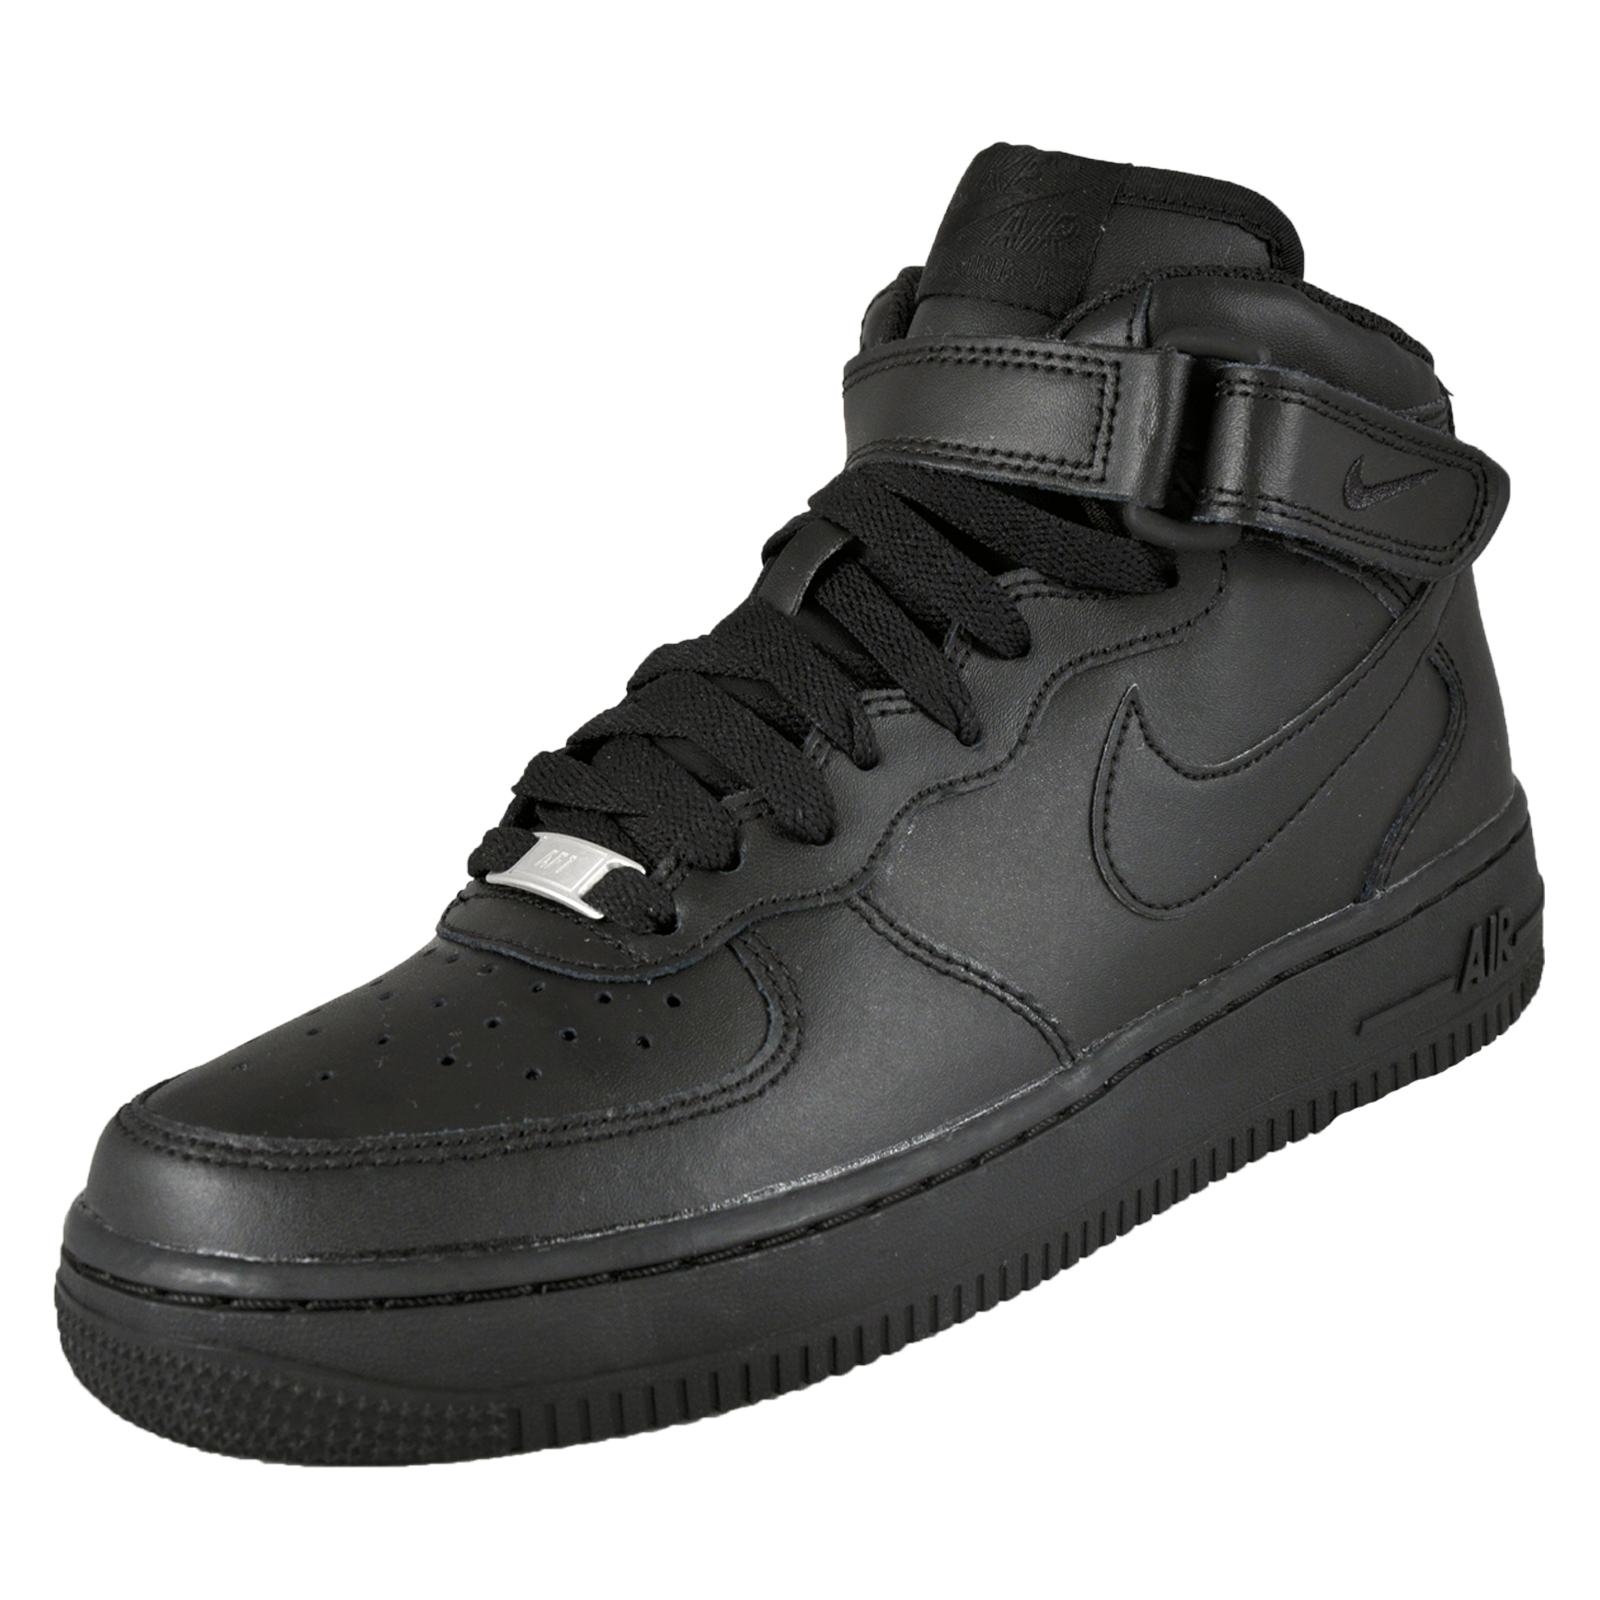 Nike Mens Air Force 1 Mid Classic Leather Trainers Black * AUTHENTIC